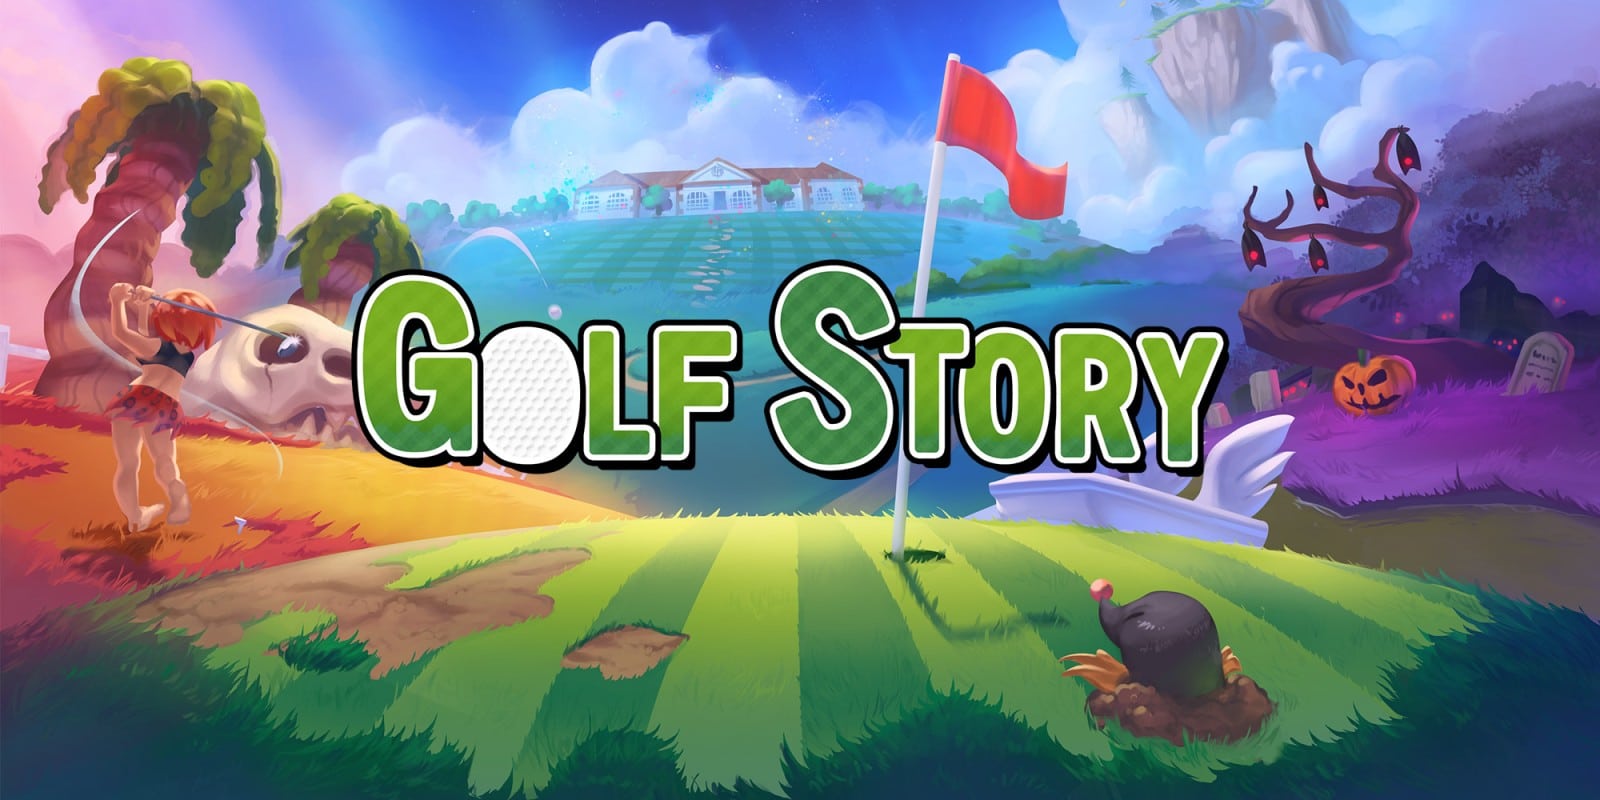 [FACT] Golf Story probably getting a physical release